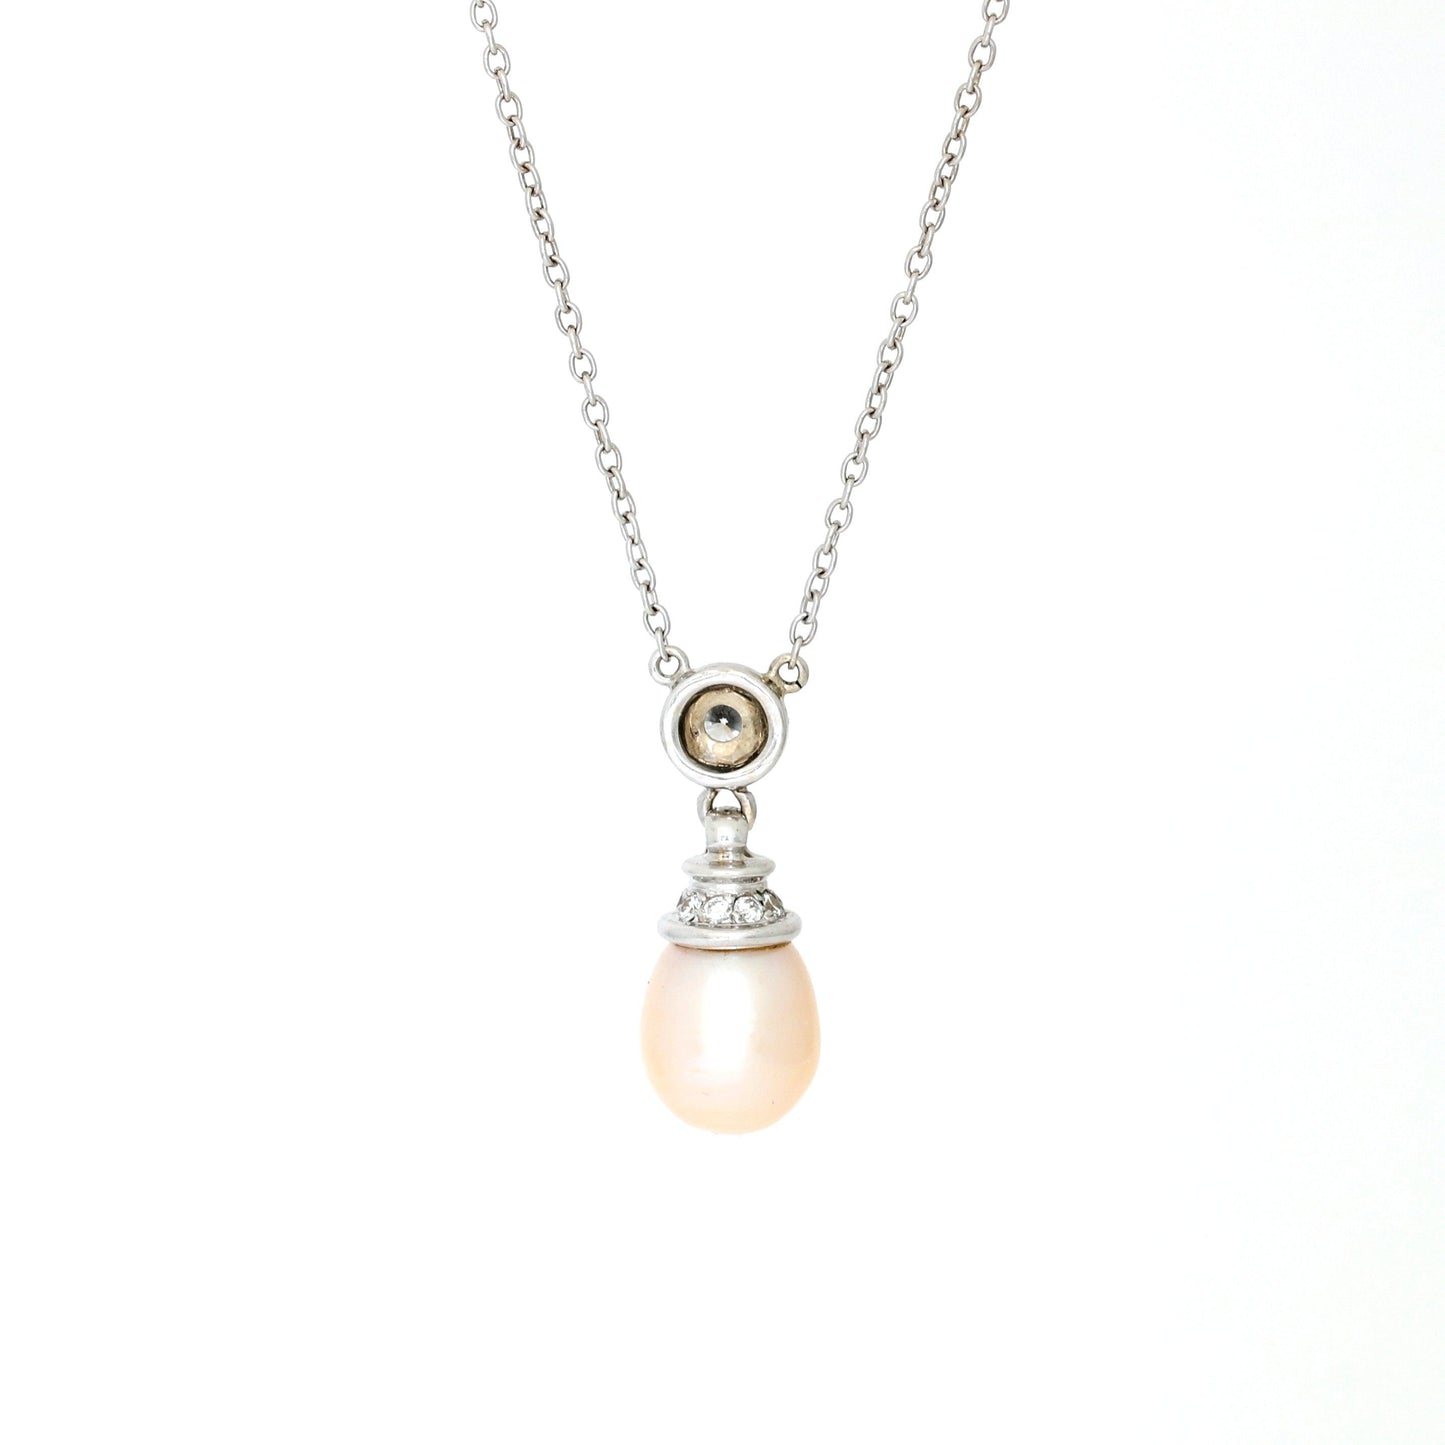 Women's Baroque Golden South Sea Cultured Diamond Necklace in 14k White Gold - 31 Jewels Inc.